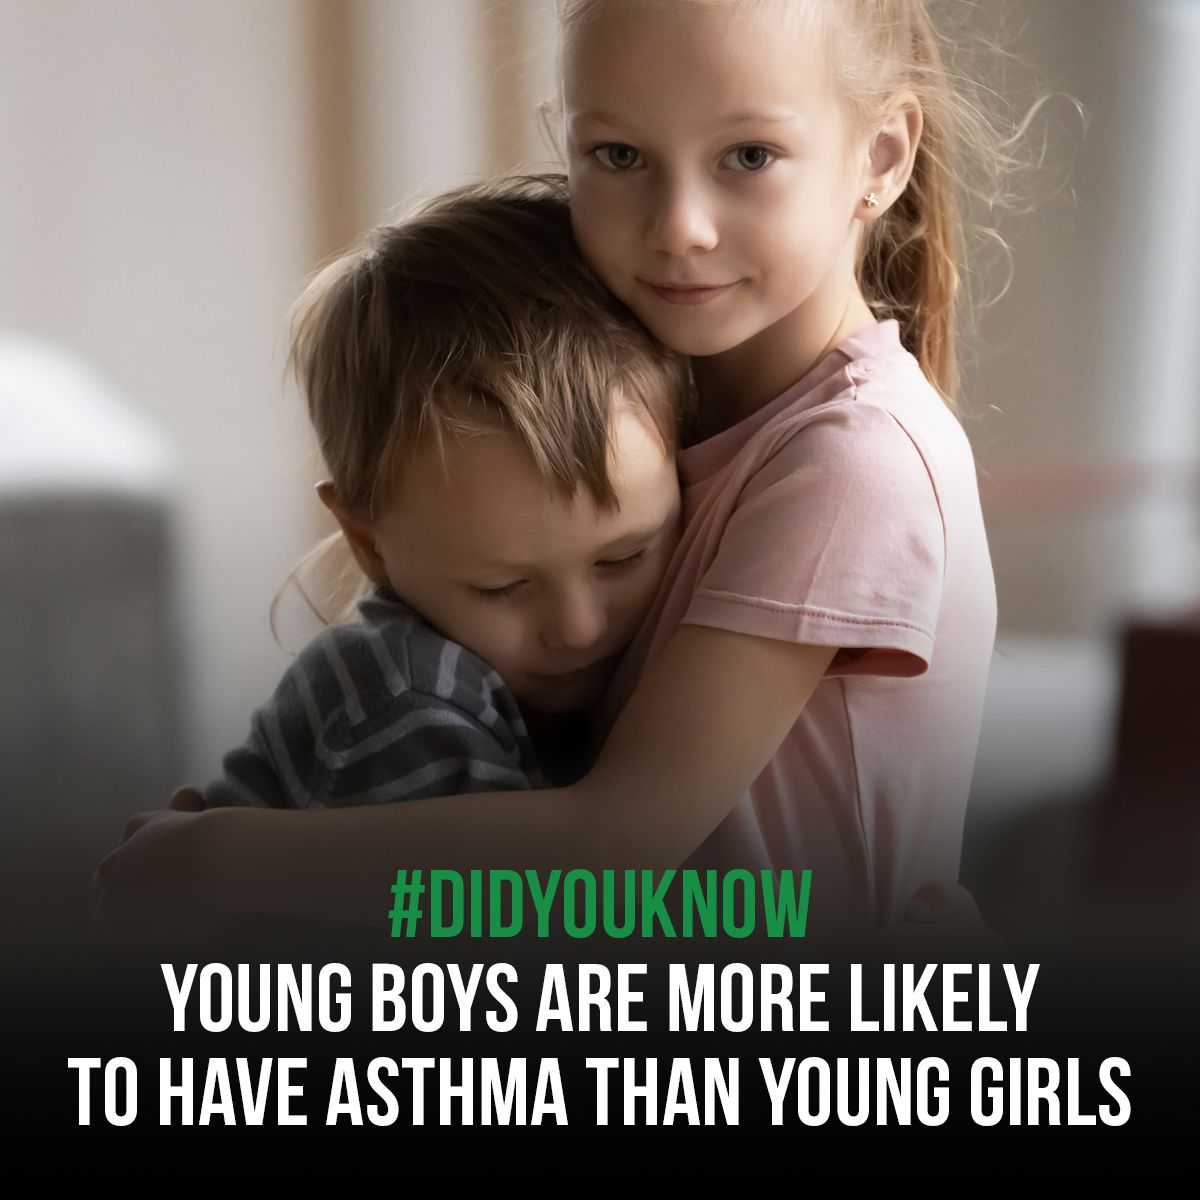 #DidYouKnow young boys are more likely to have asthma than young girls